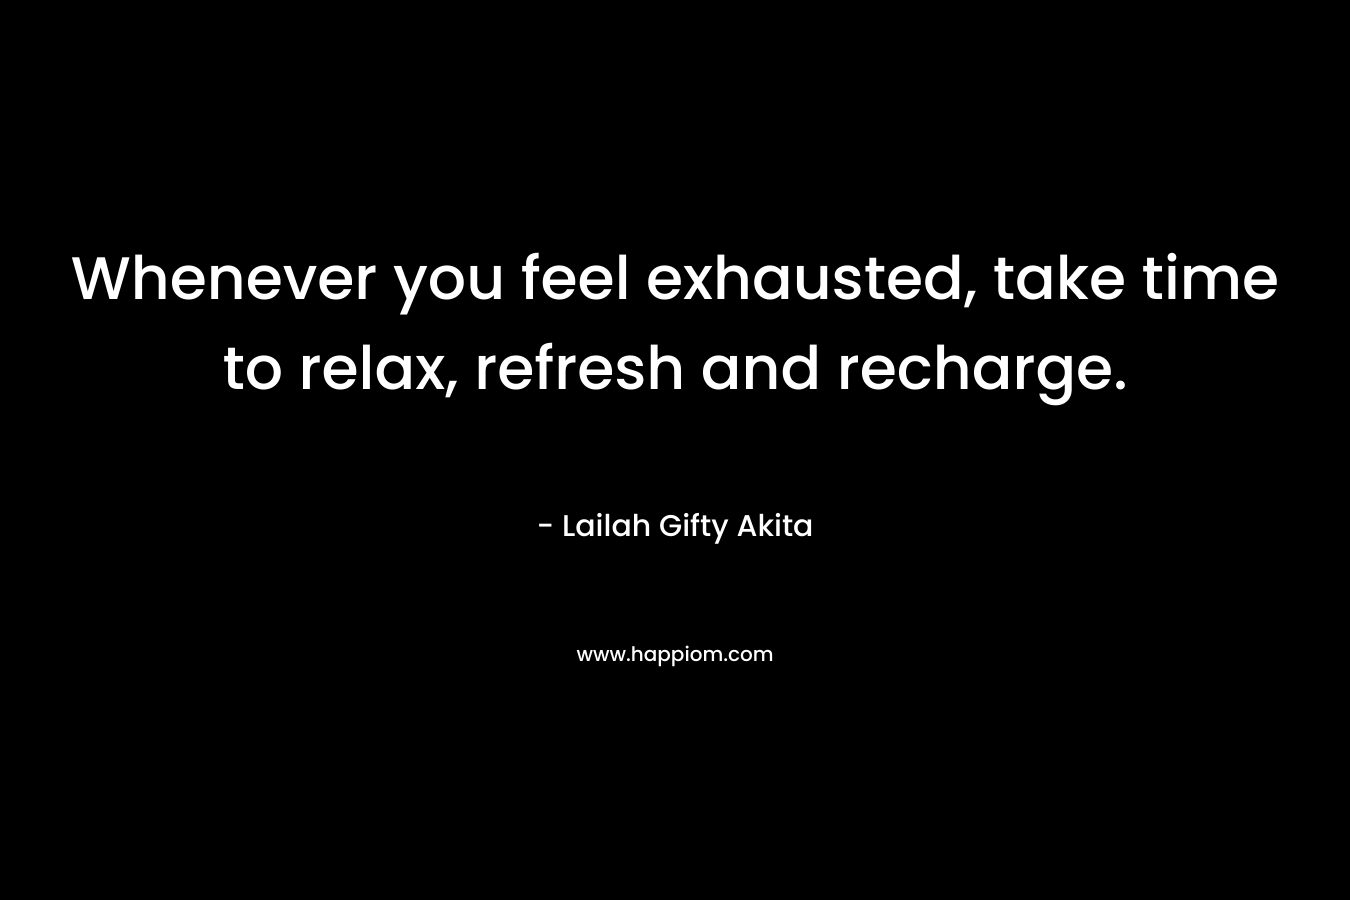 Whenever you feel exhausted, take time to relax, refresh and recharge. – Lailah Gifty Akita